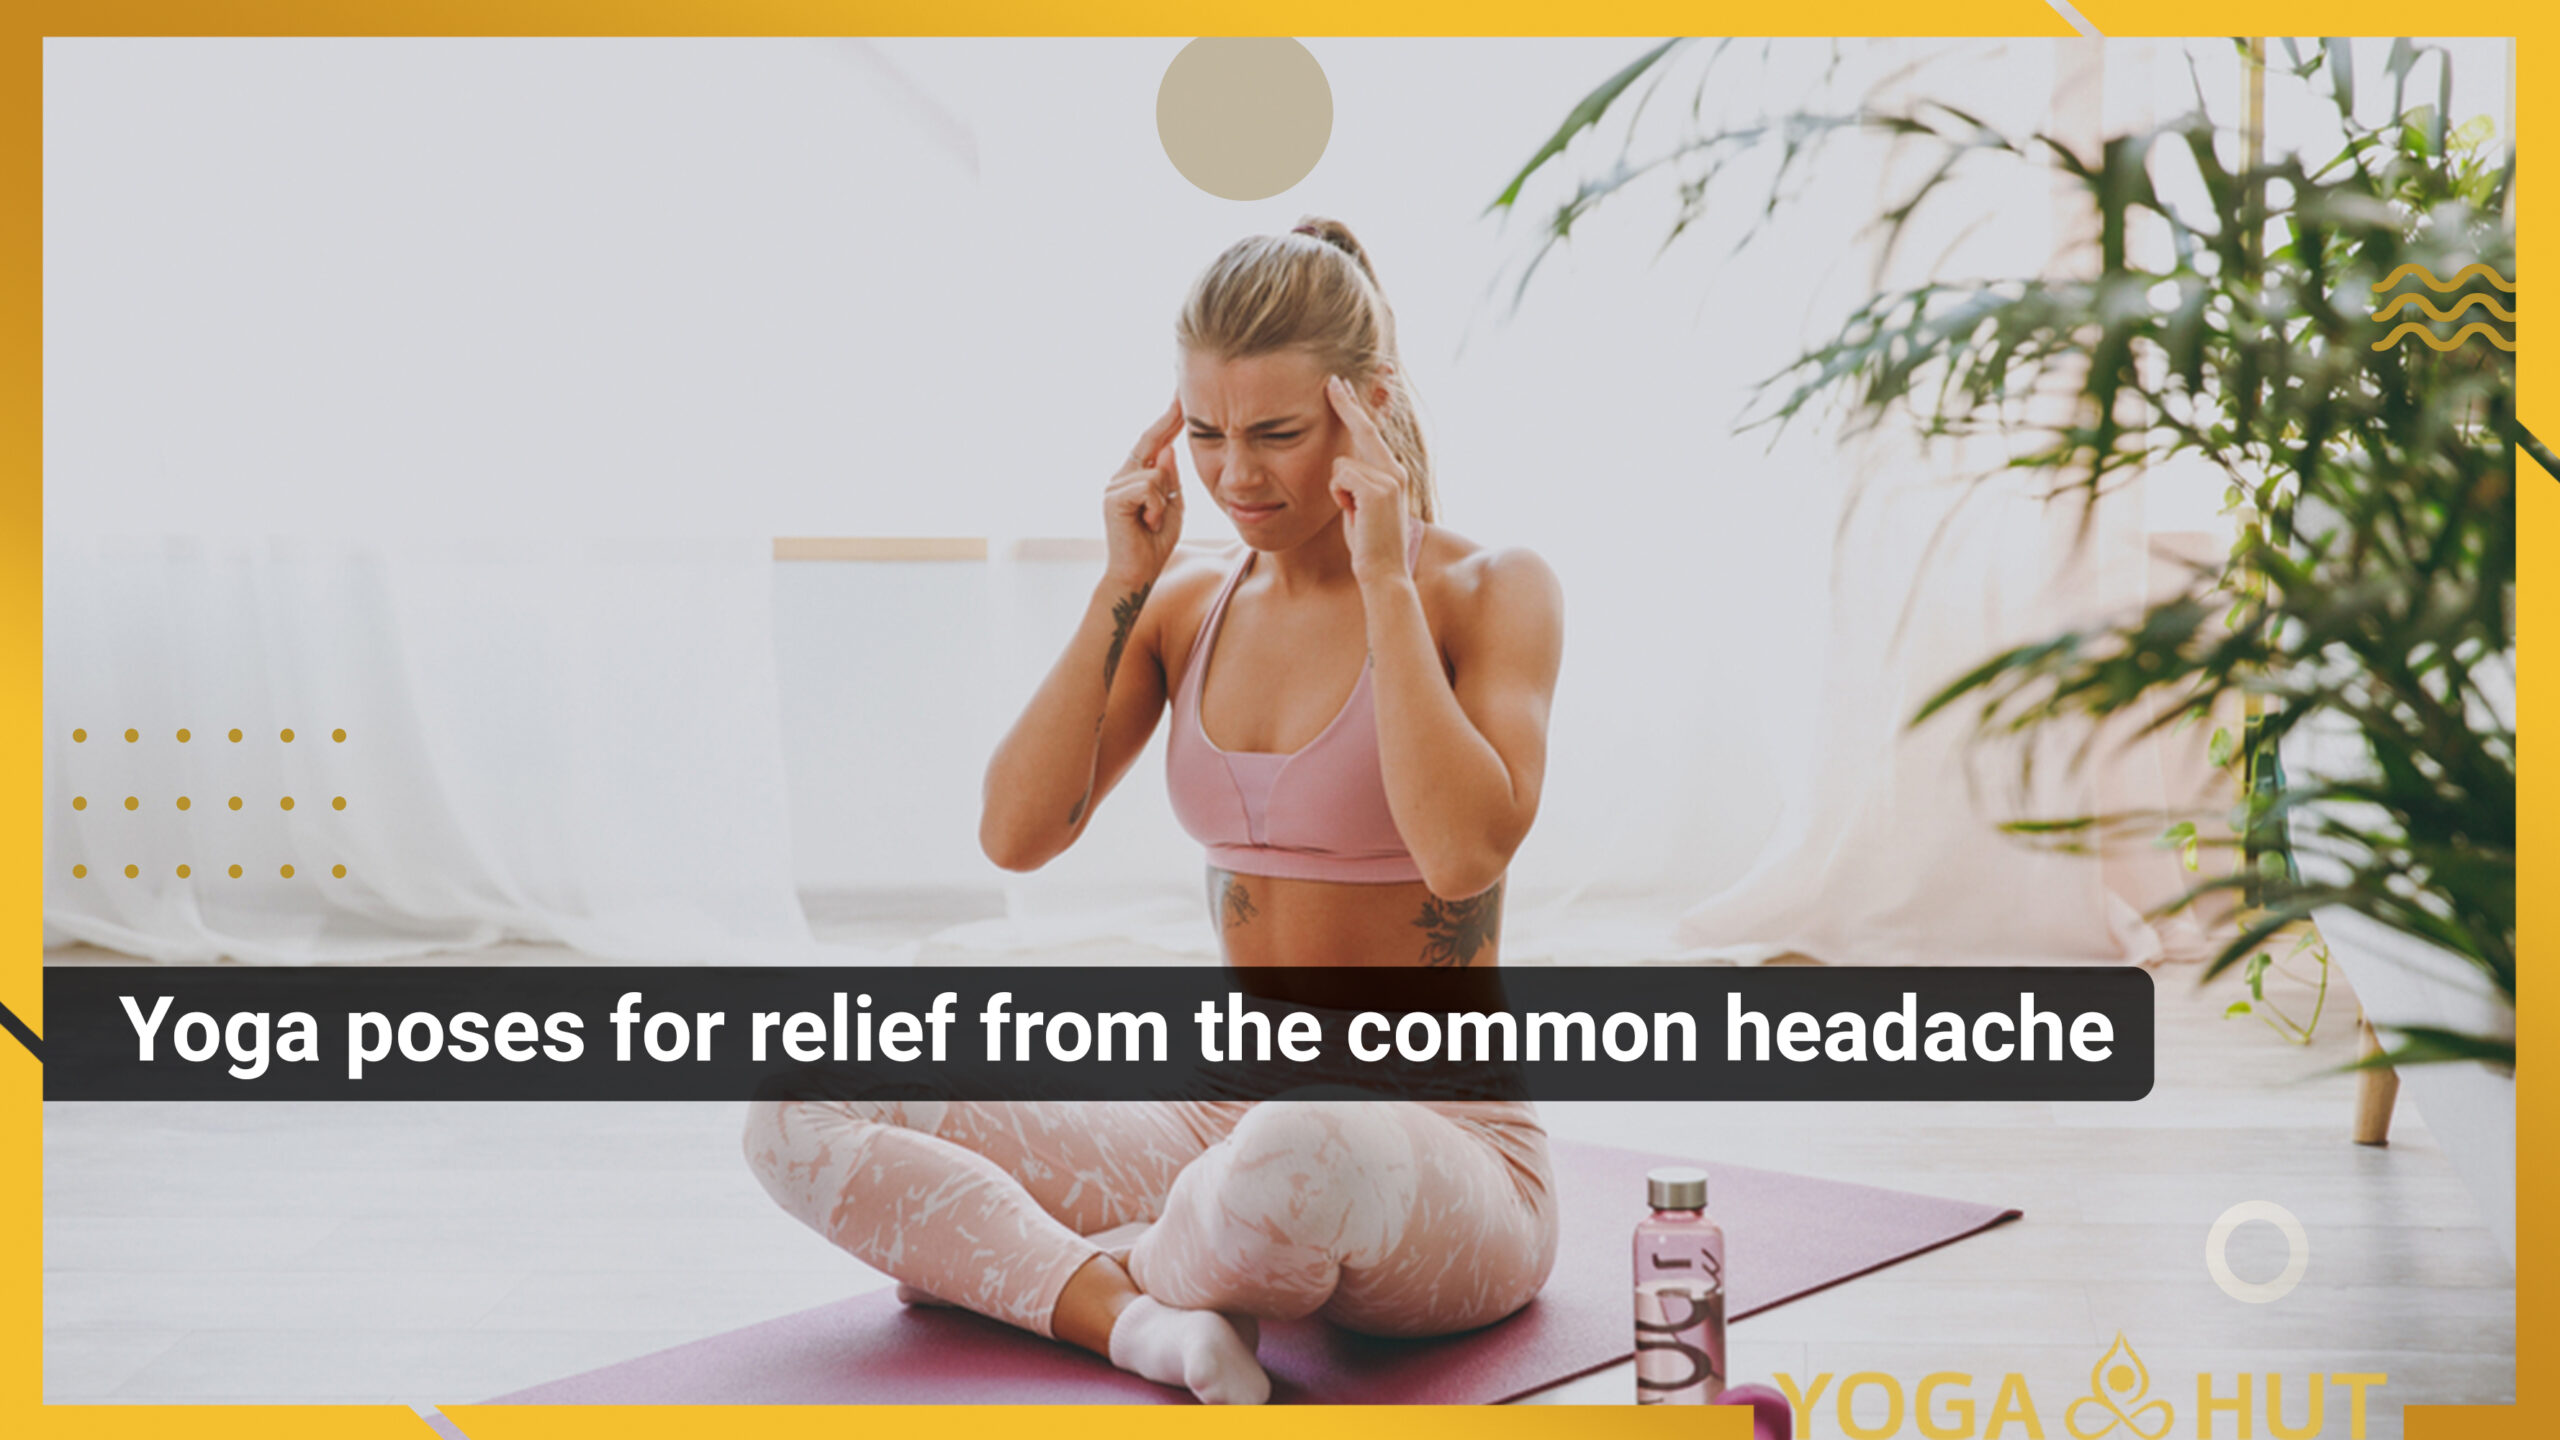 Stress is triggering your migraines. Mindfulness meditation and yoga can  help reduce frequency & pain severity - The Economic Times